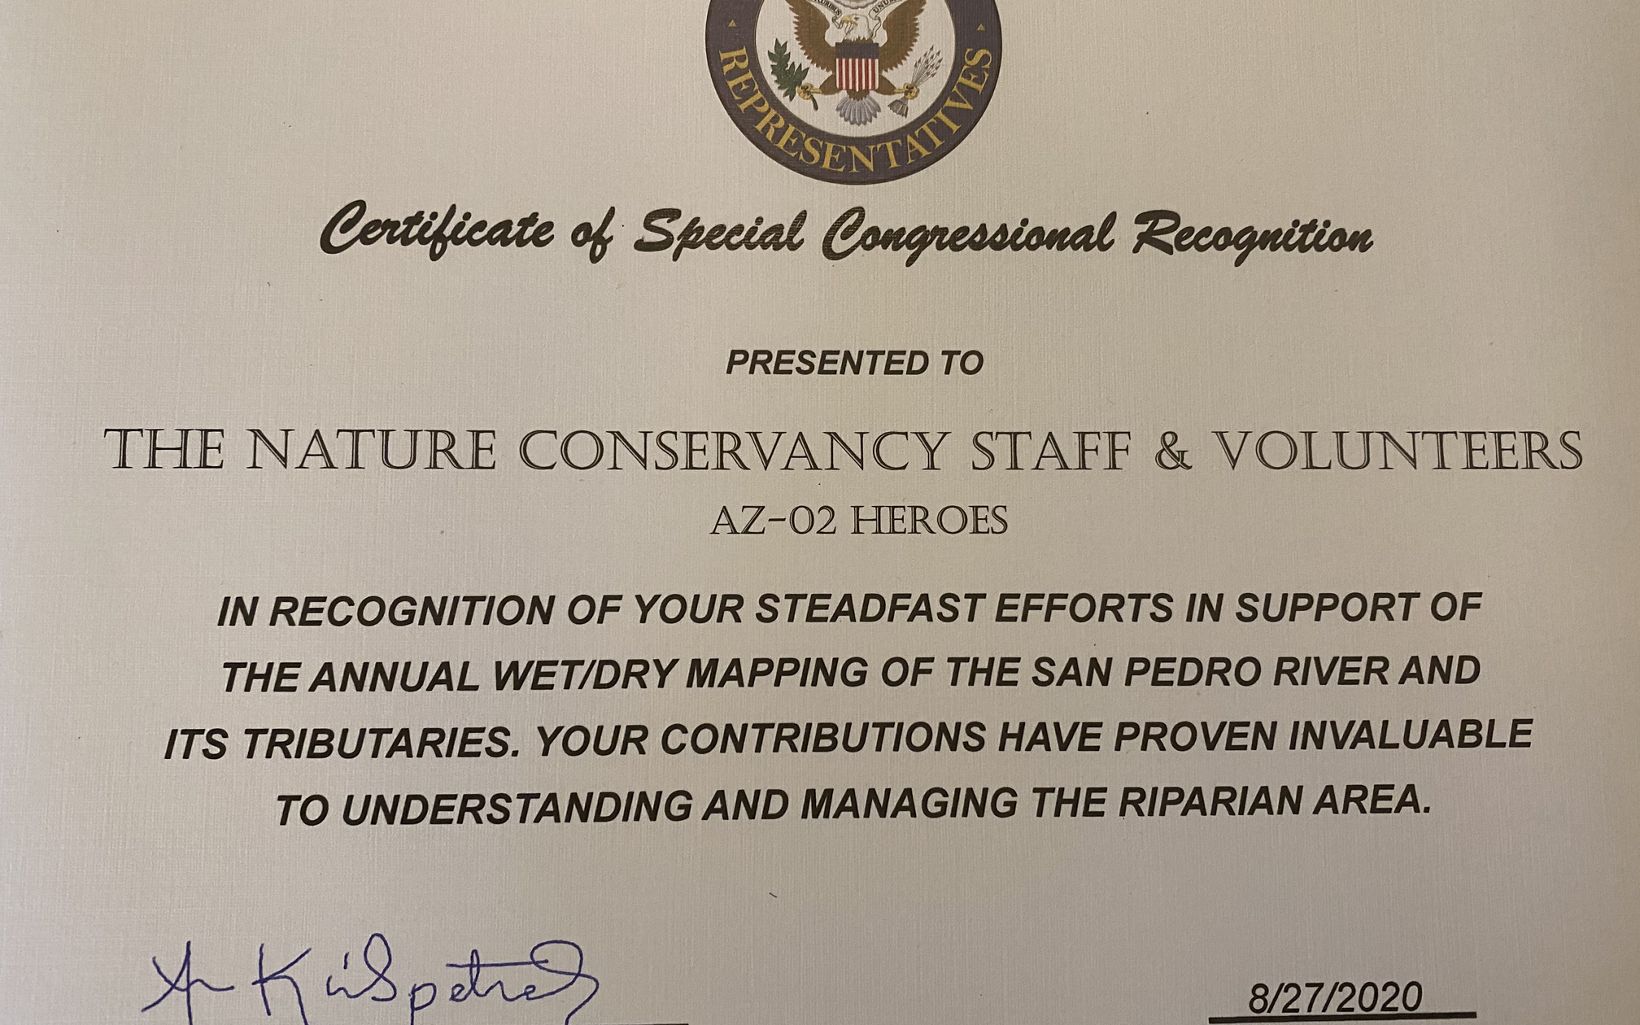 Photo of a certificate of special Congressional recognition. 